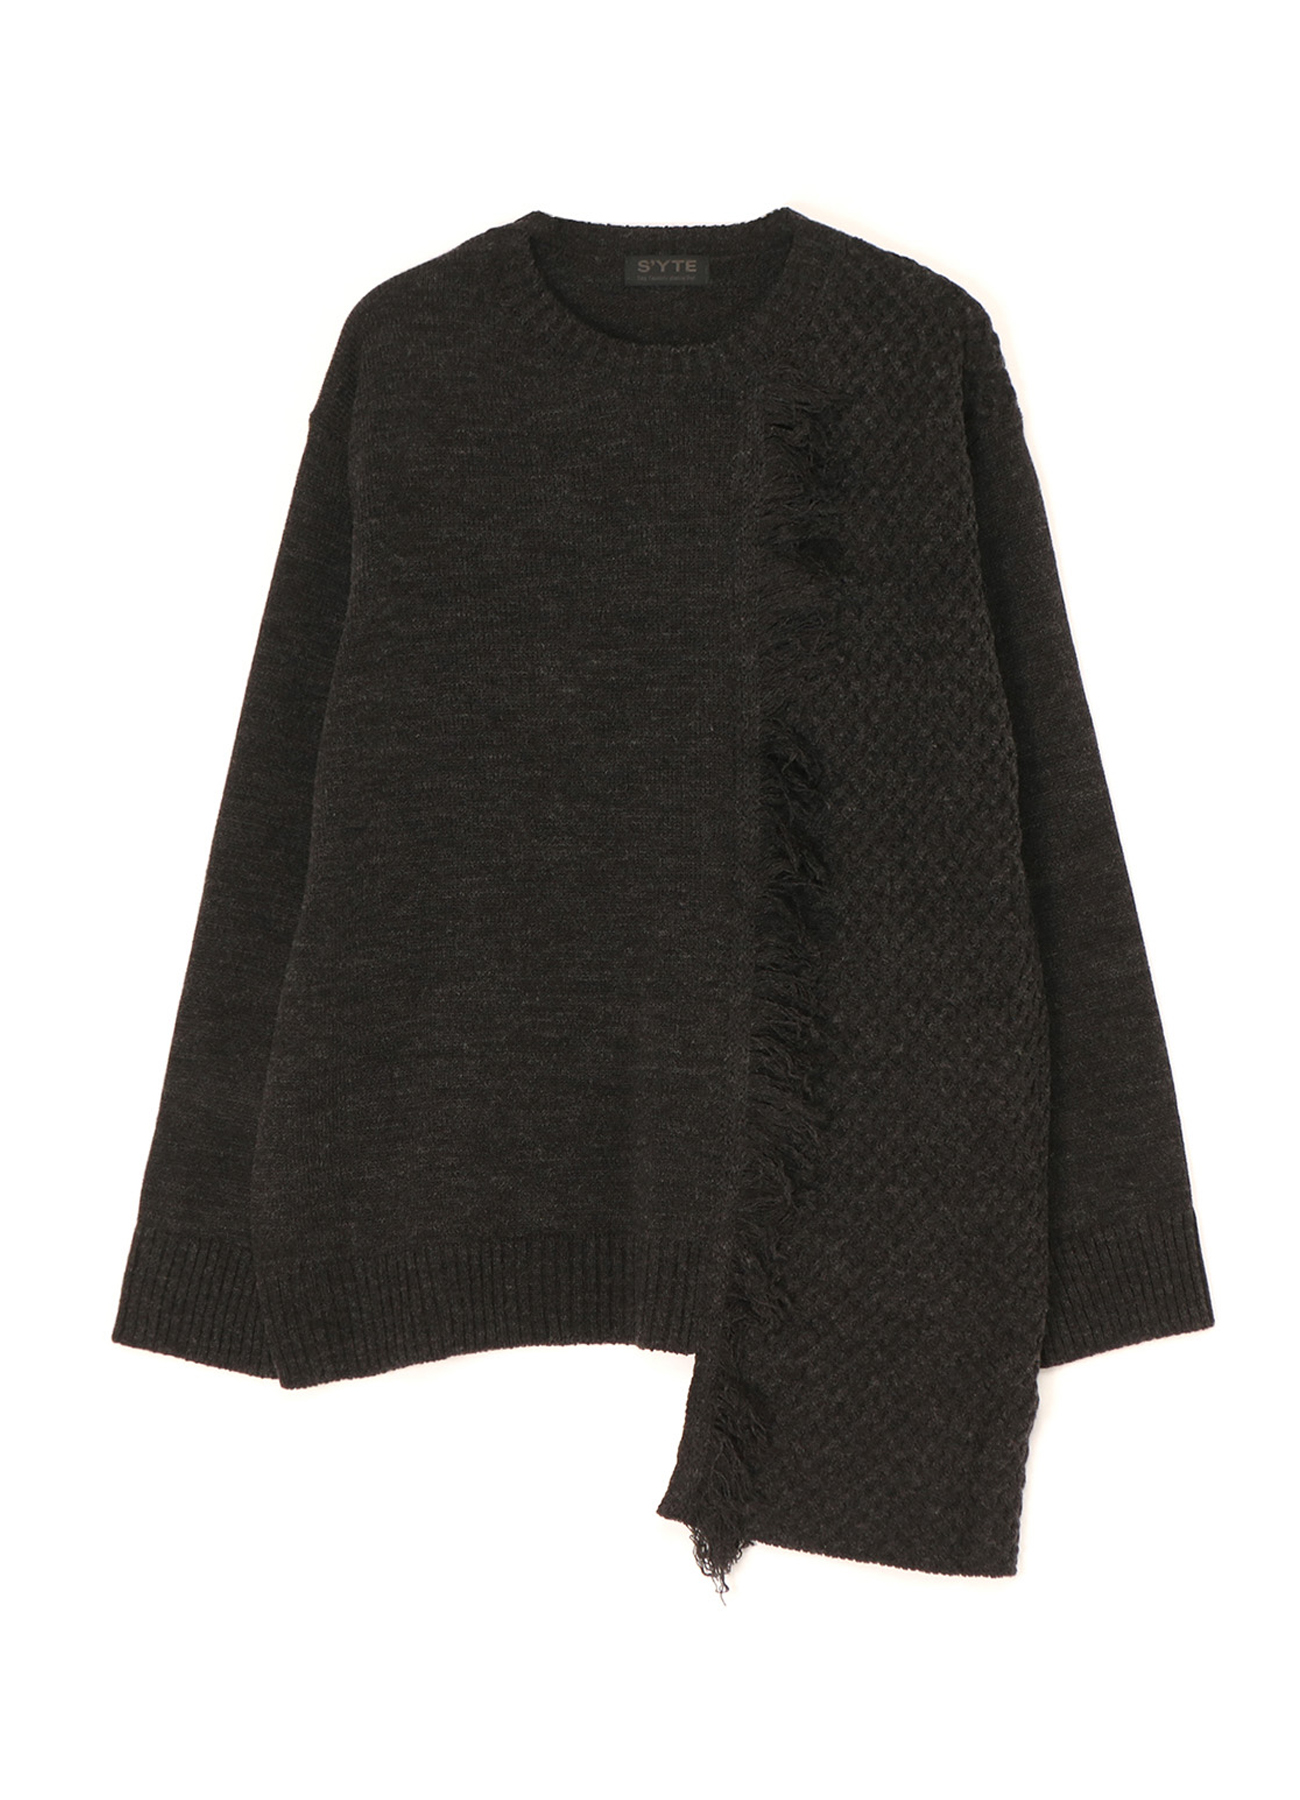 ASYMMETRICAL DESIGN KNIT WITH FRINGE DETAIL SWITCHED TO JACQUARD KNITTING